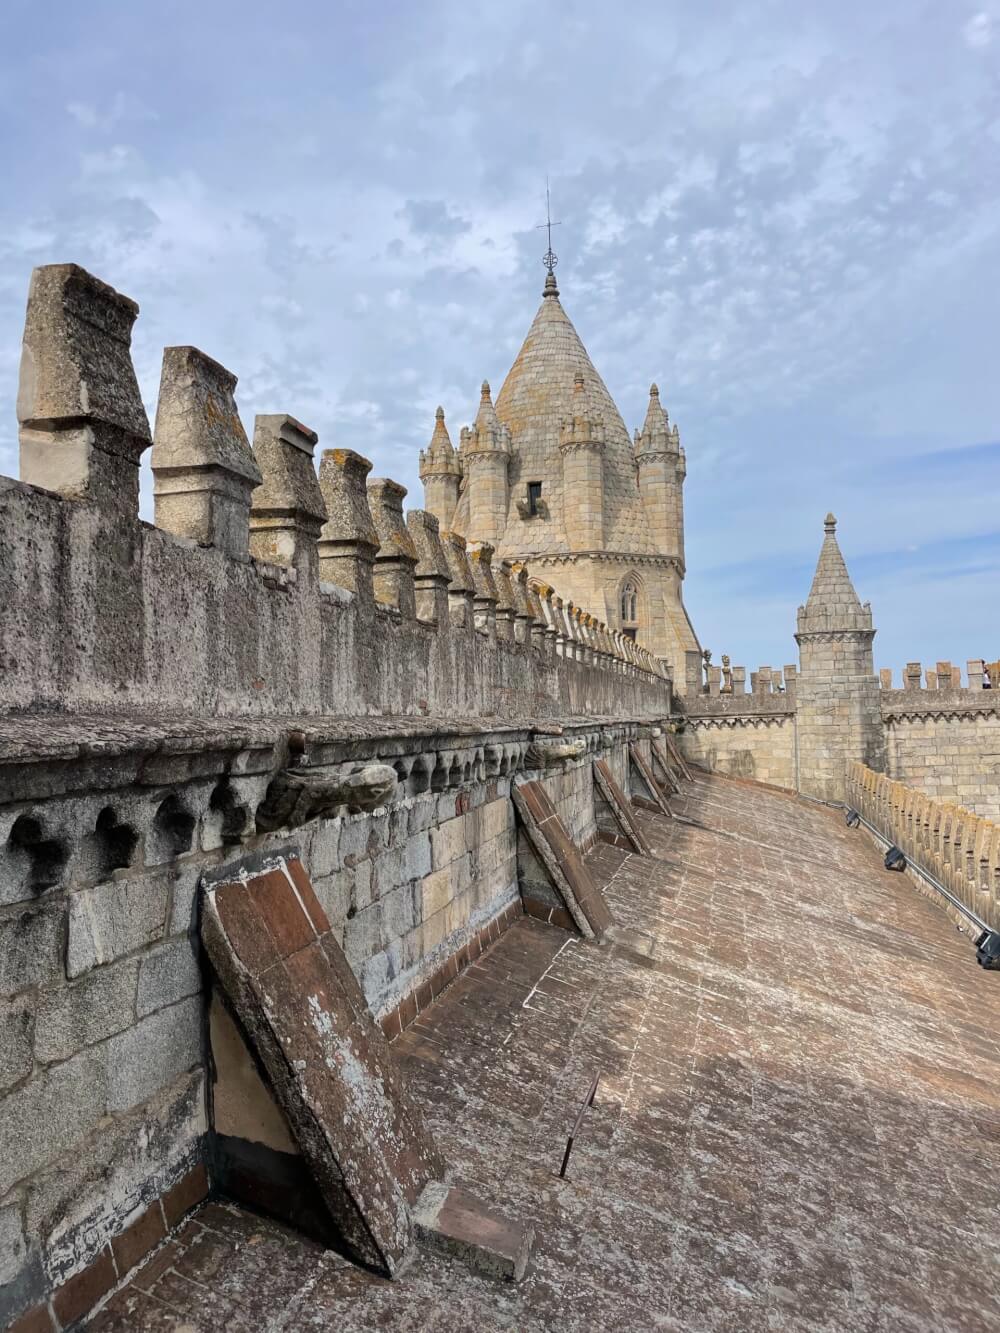 The roof of the cathedral of Evora. The picture shows a wall with stone spikes, a round medieval tower, and a sky full of clouds. 